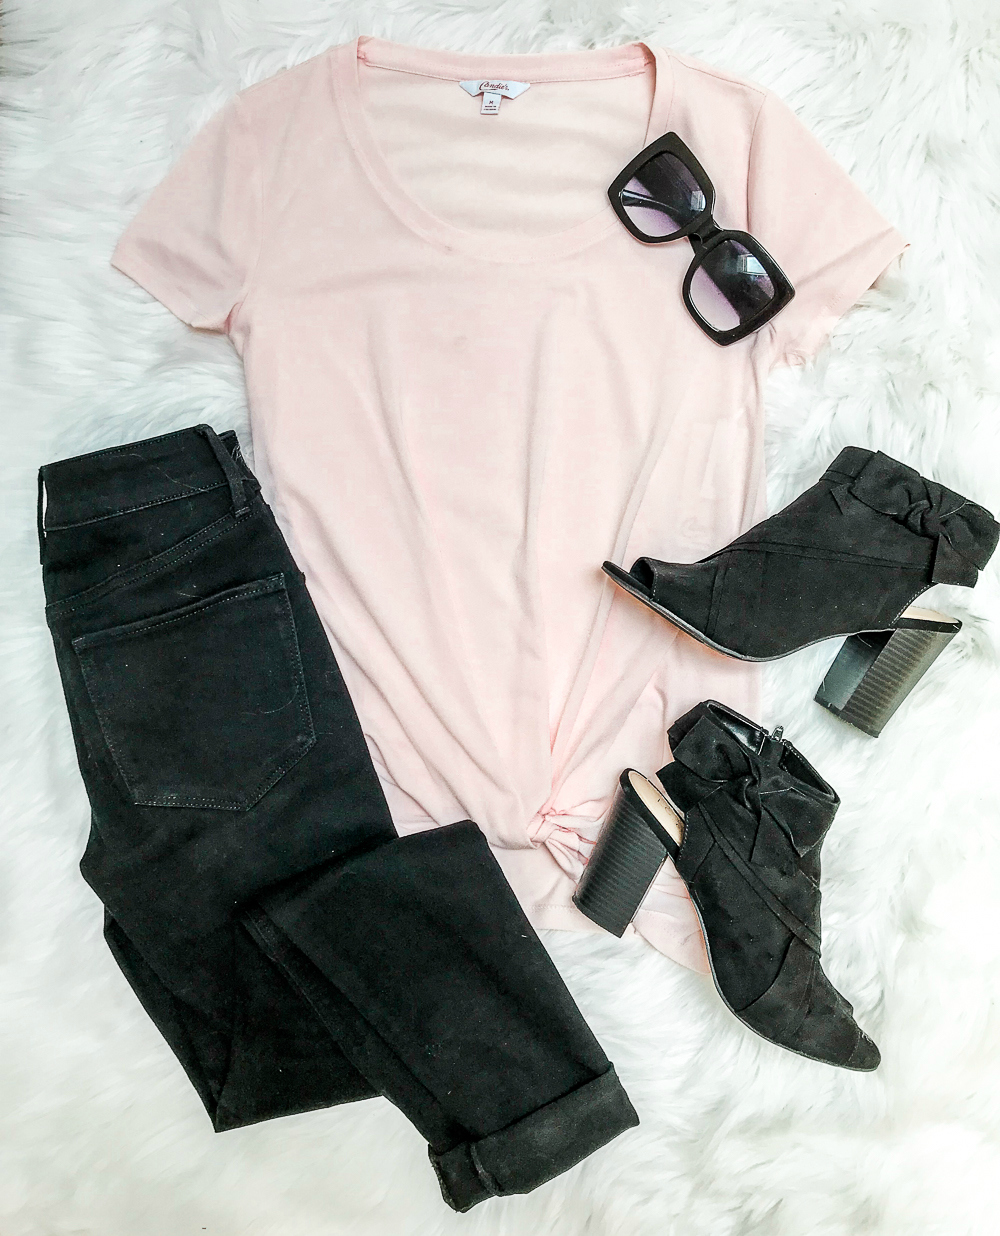  3 cute outfit ideas for school from Kohl's, Back to School Lookbook: Fall Style Picks from Kohl's by affordable fashion blogger Stephanie Ziajka from Diary of a Debutante, 3 casual college outfits from Kohl's, cute college clothes, teenage outfit ideas for school